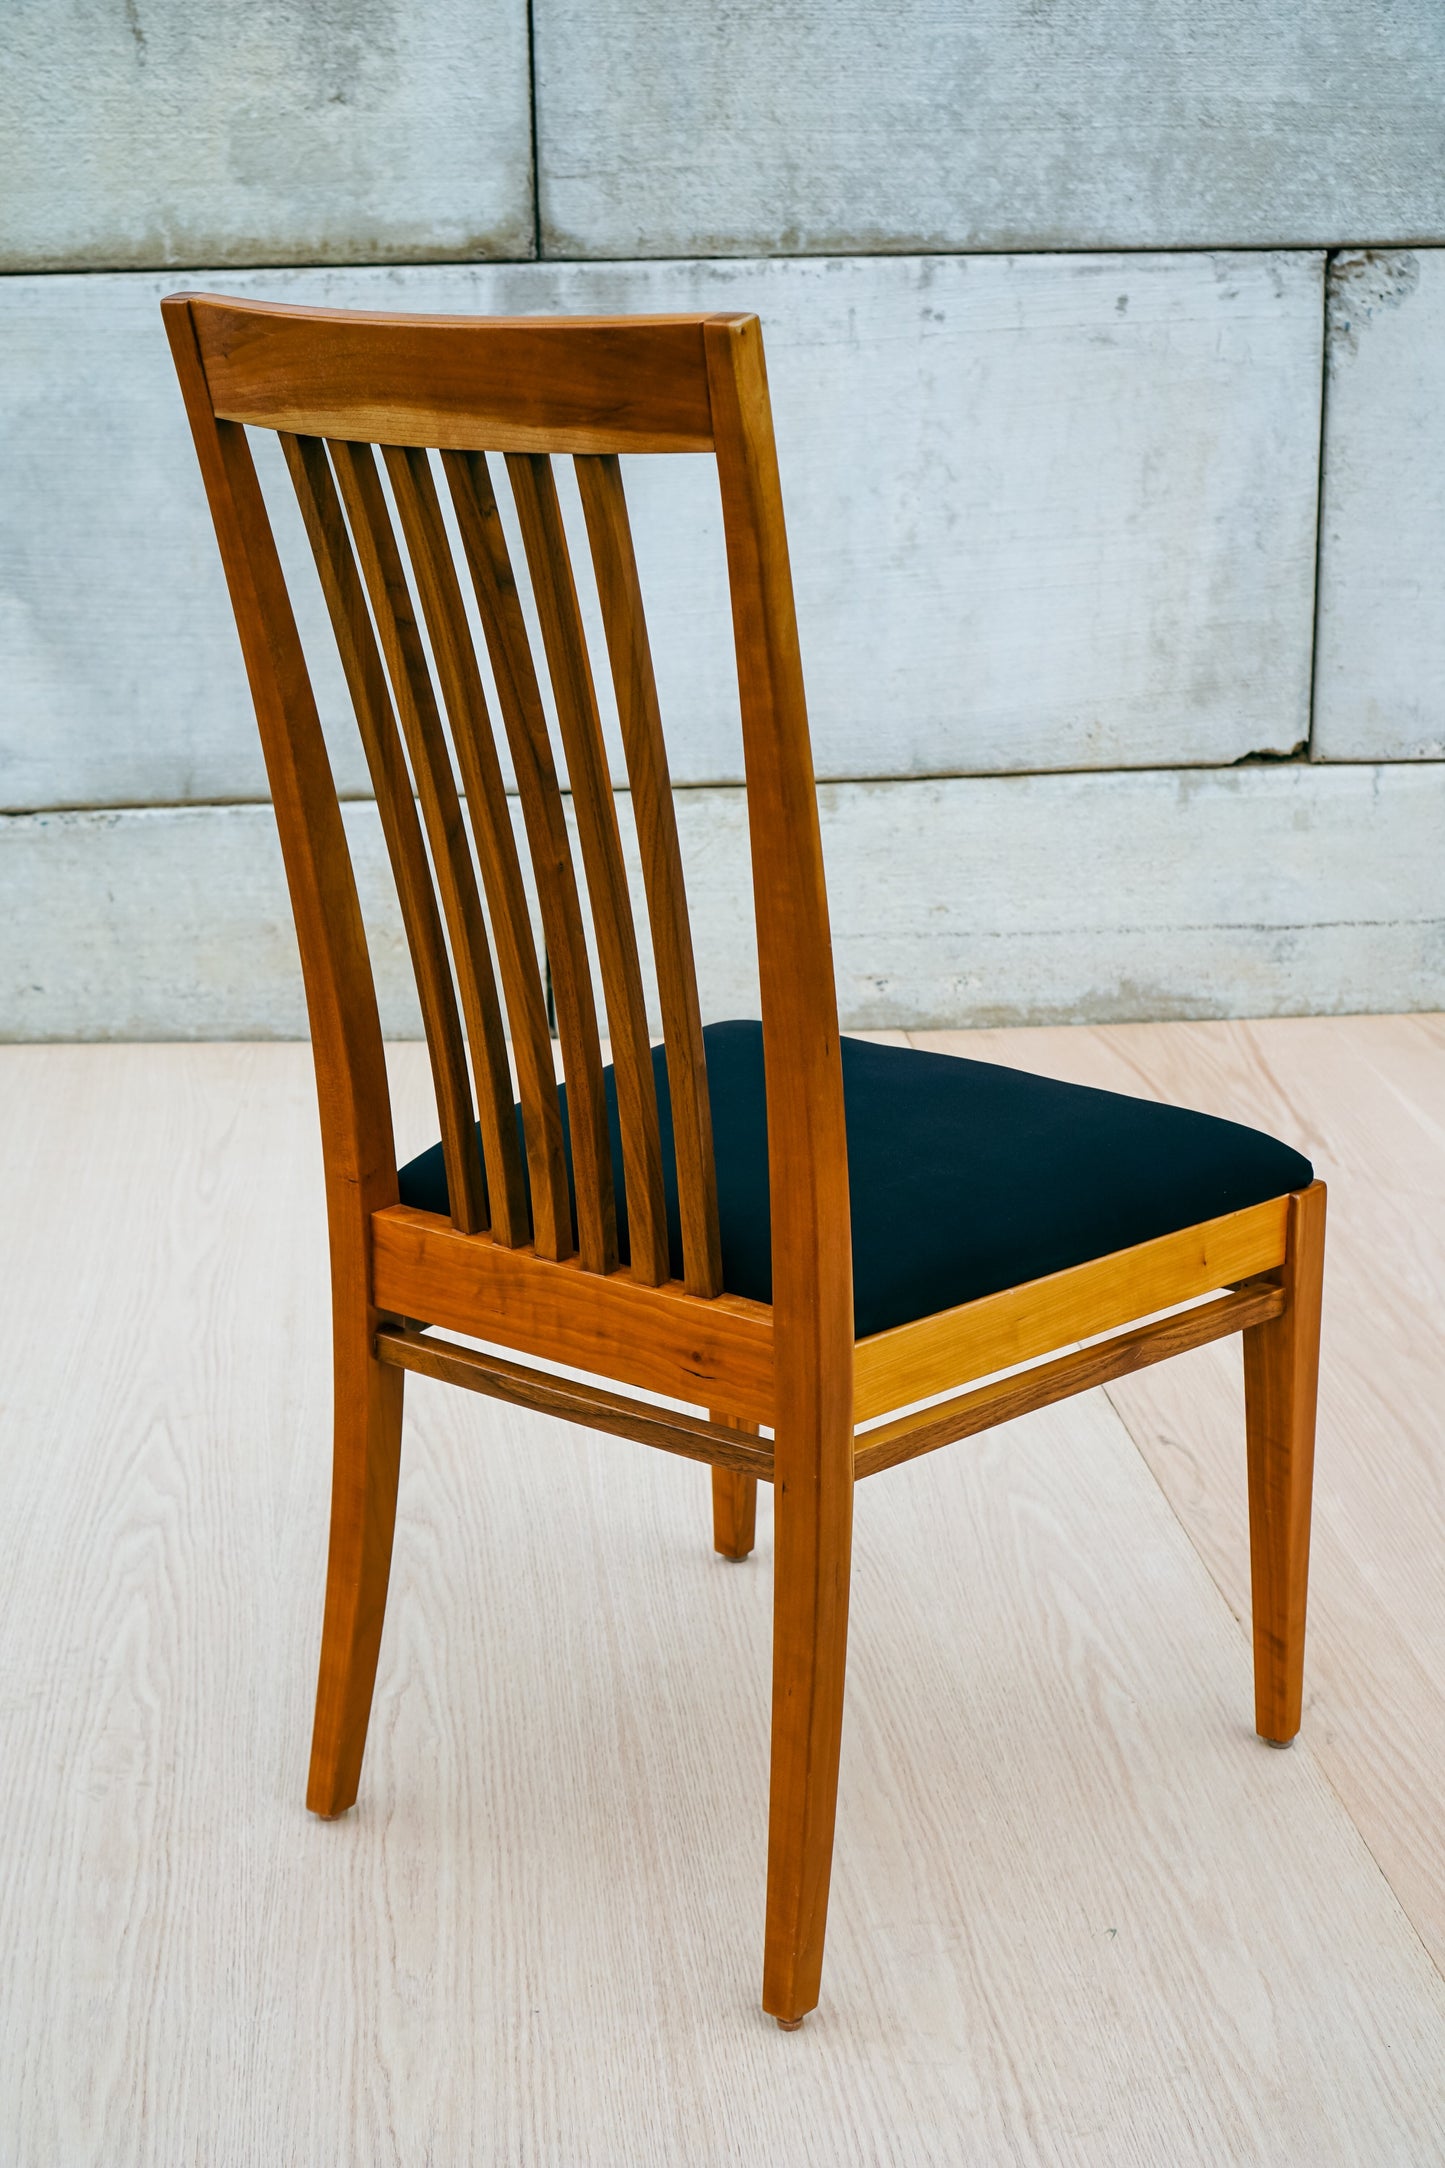 Whidbey Chair